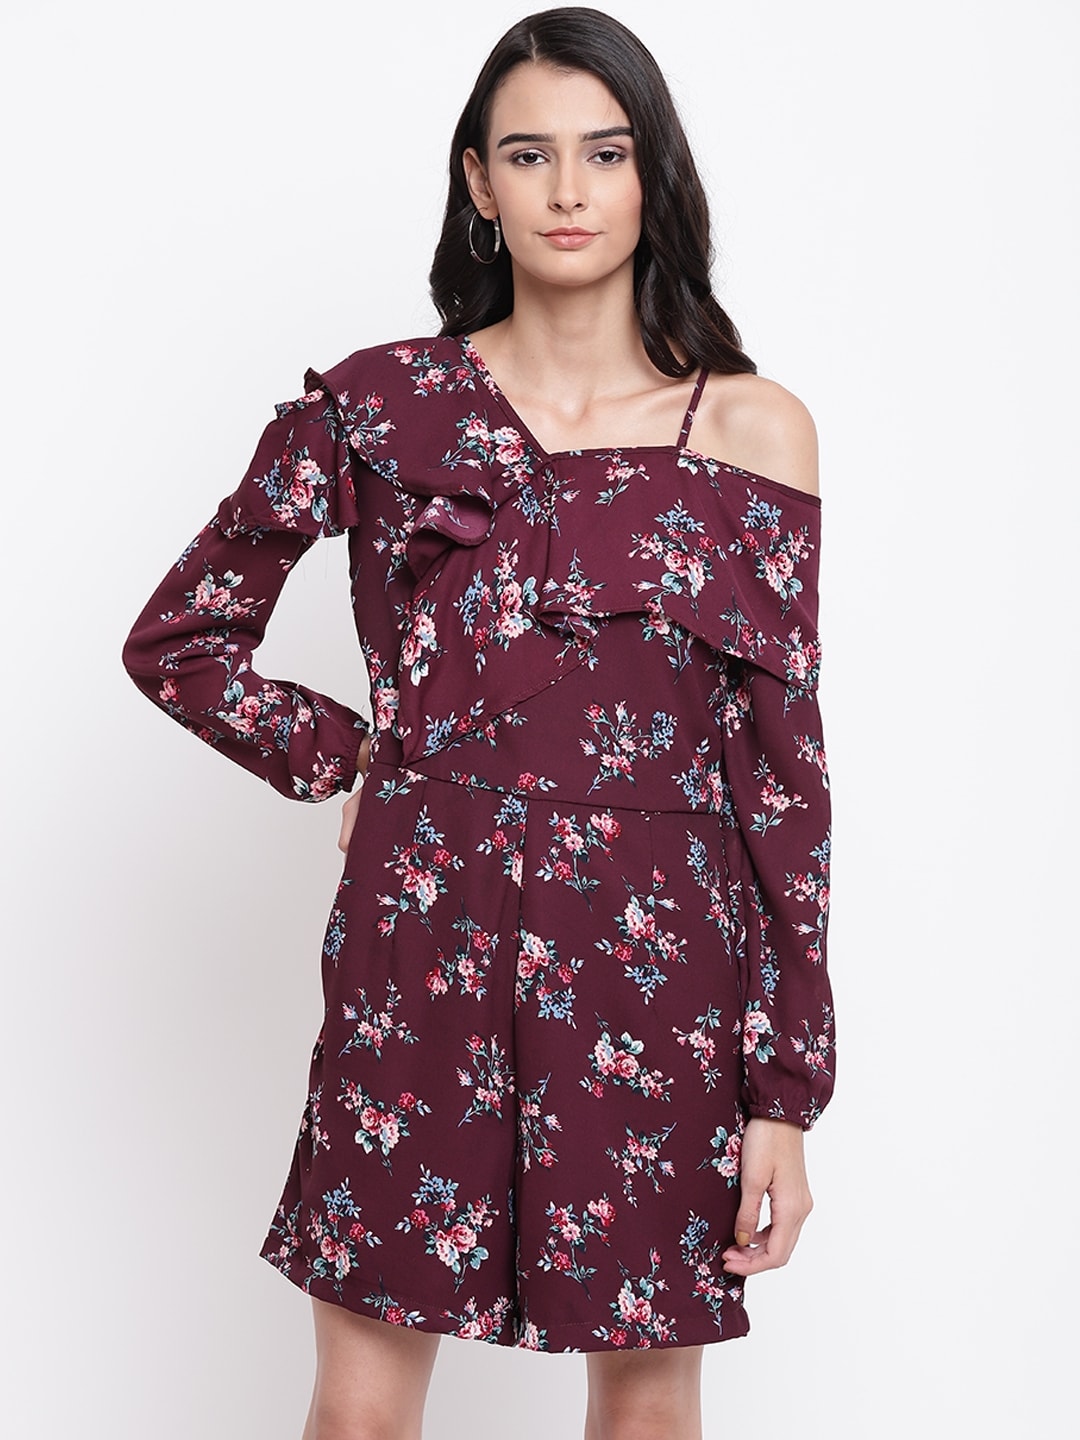 Belle Fille Burgundy & Pink Printed Playsuit Price in India